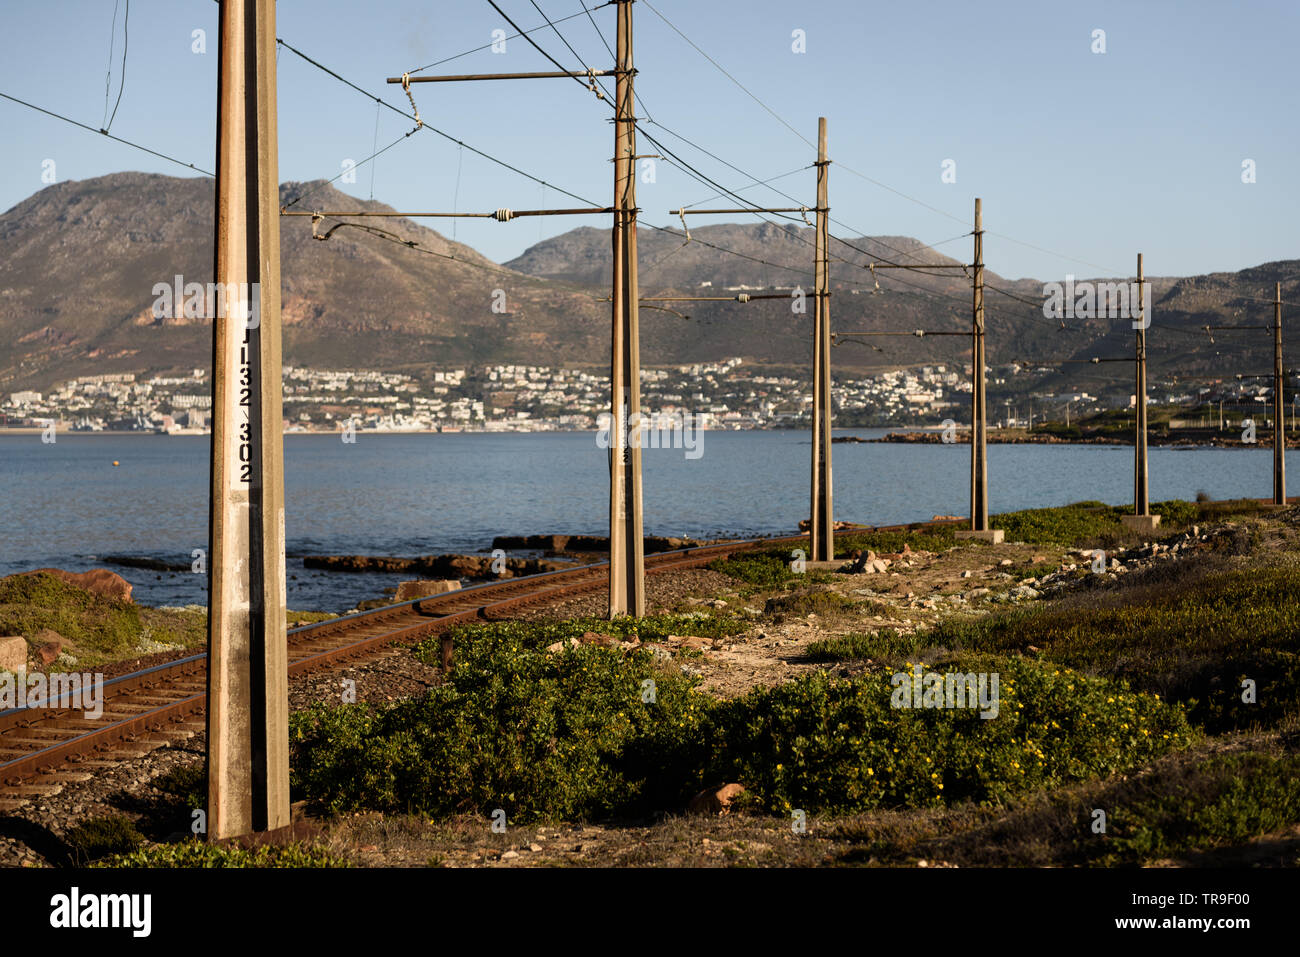 The railway between Muizenberg and Simons Town follows the False Bay coastline on the Cape Peninsula, near Cape Town, in South Africa Stock Photo